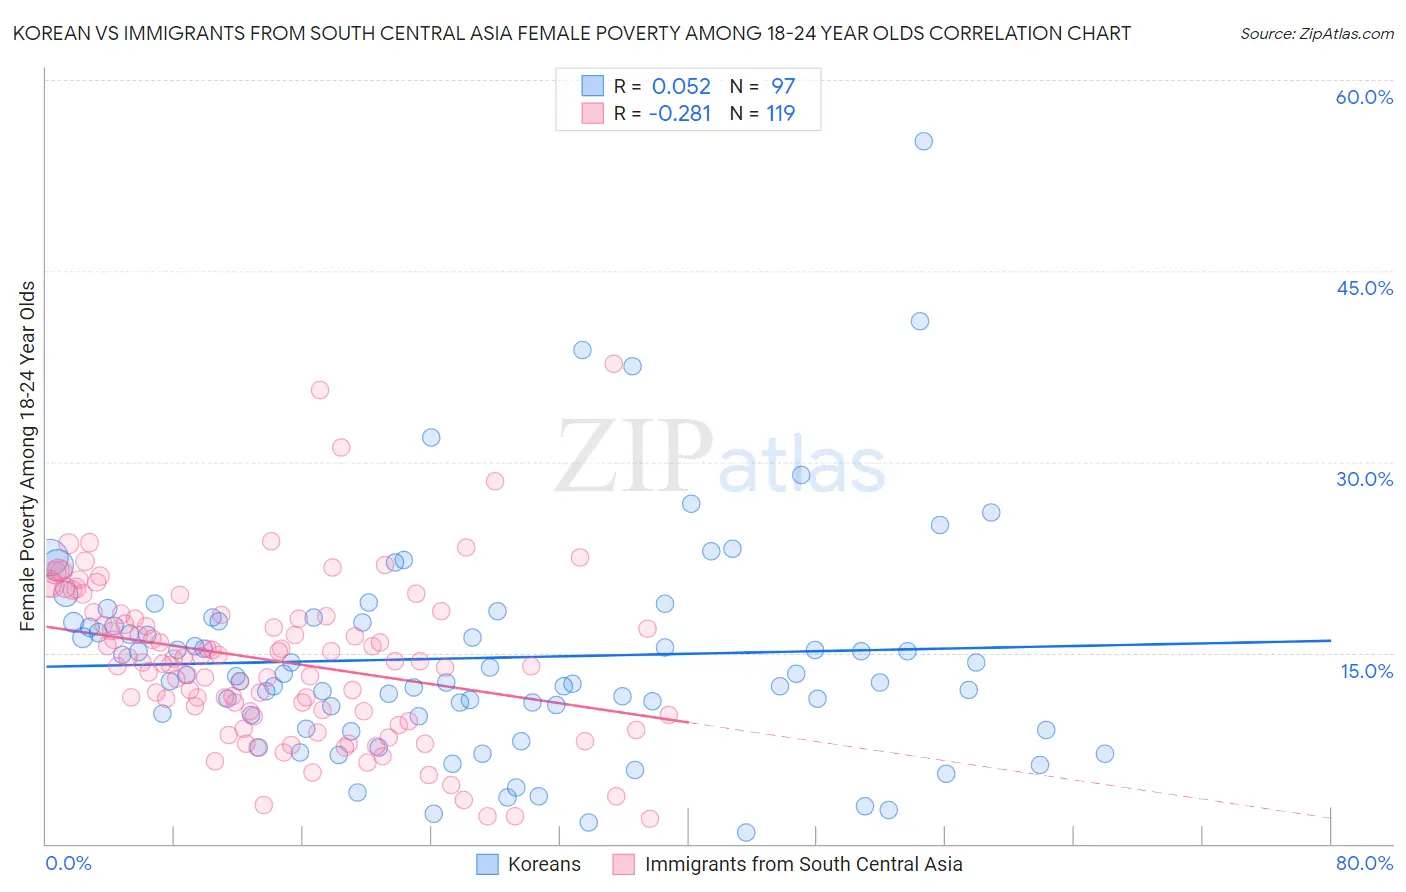 Korean vs Immigrants from South Central Asia Female Poverty Among 18-24 Year Olds